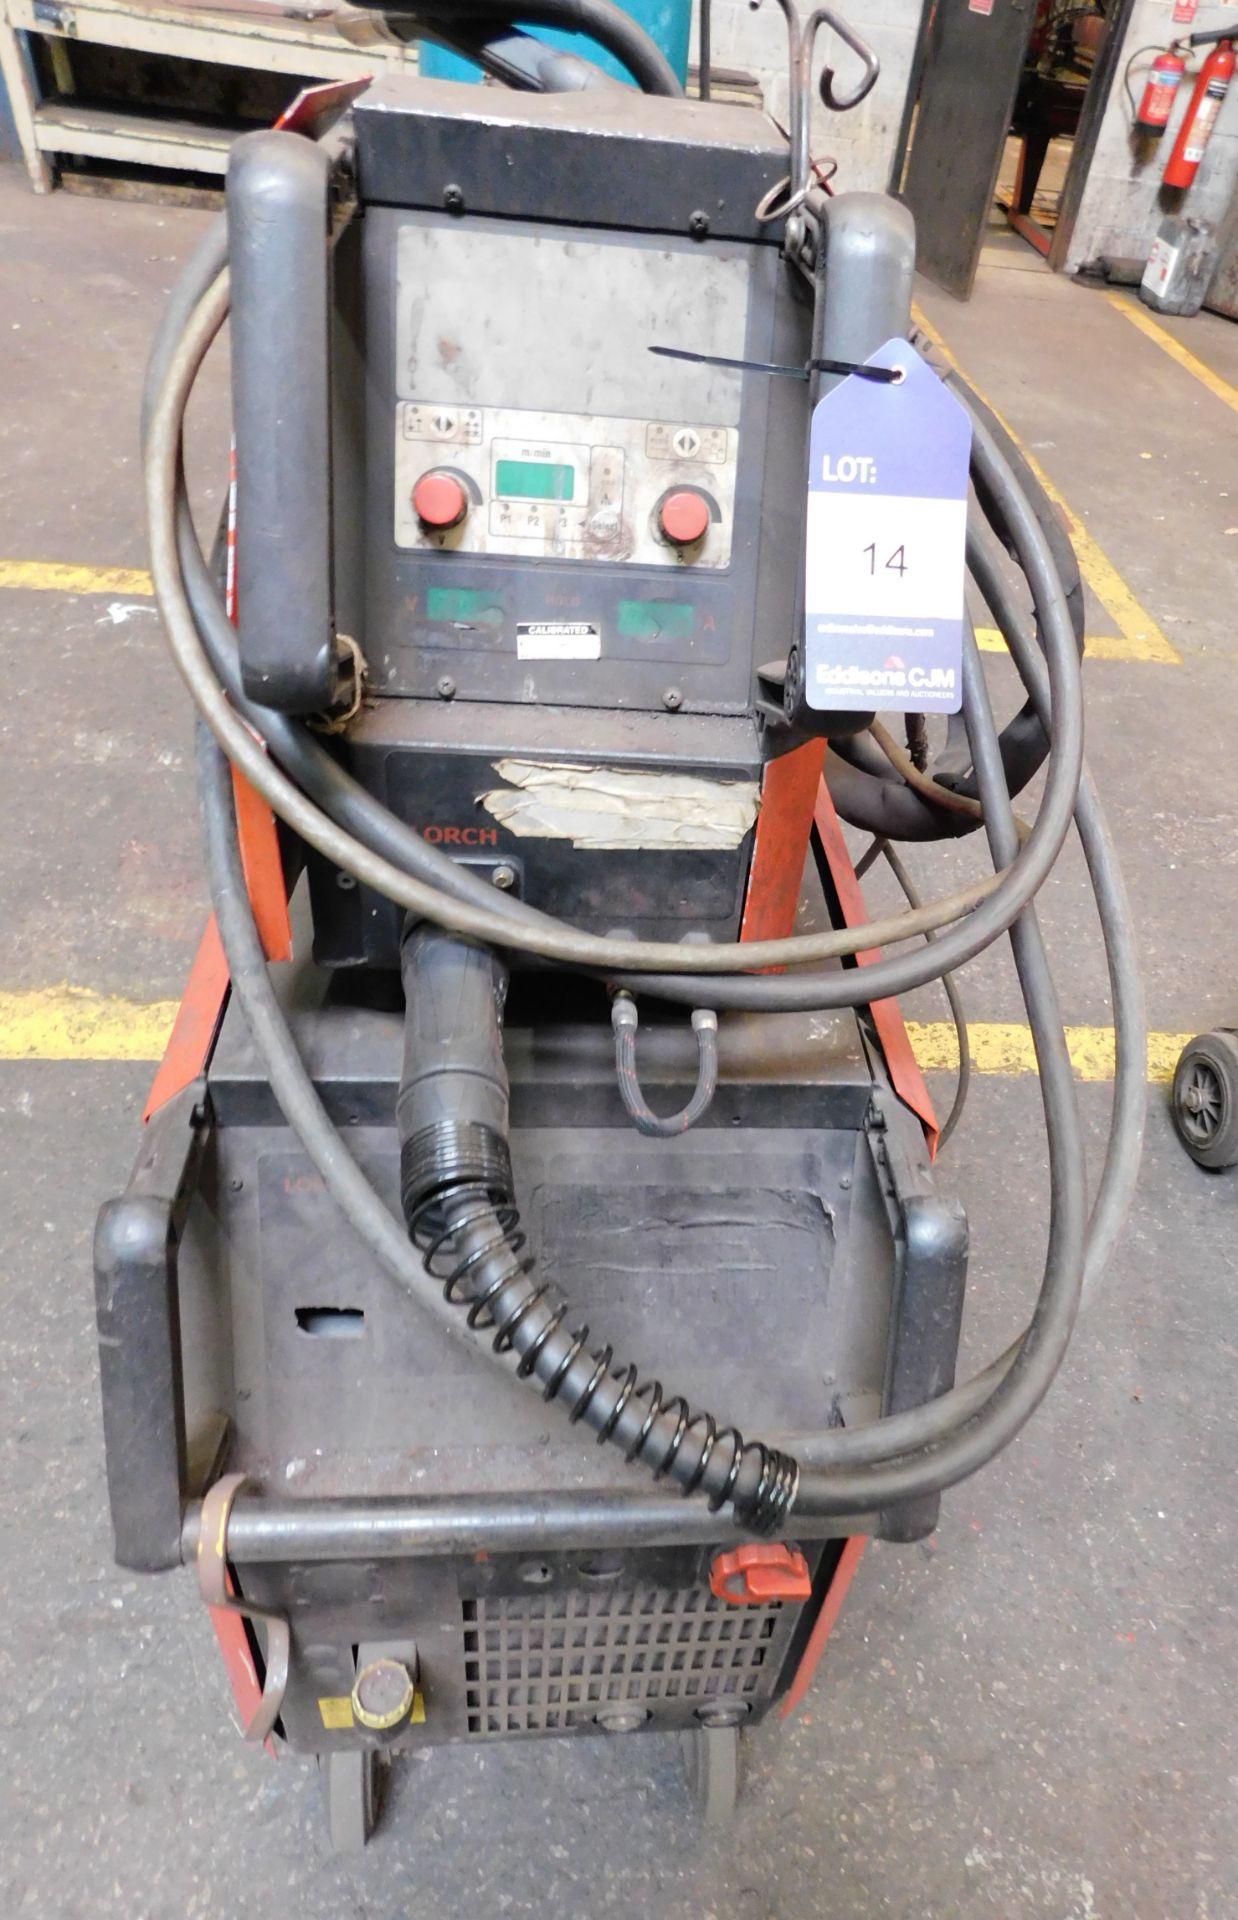 Lorch P4000 Mig Welding Set (Possible Fault, Spare